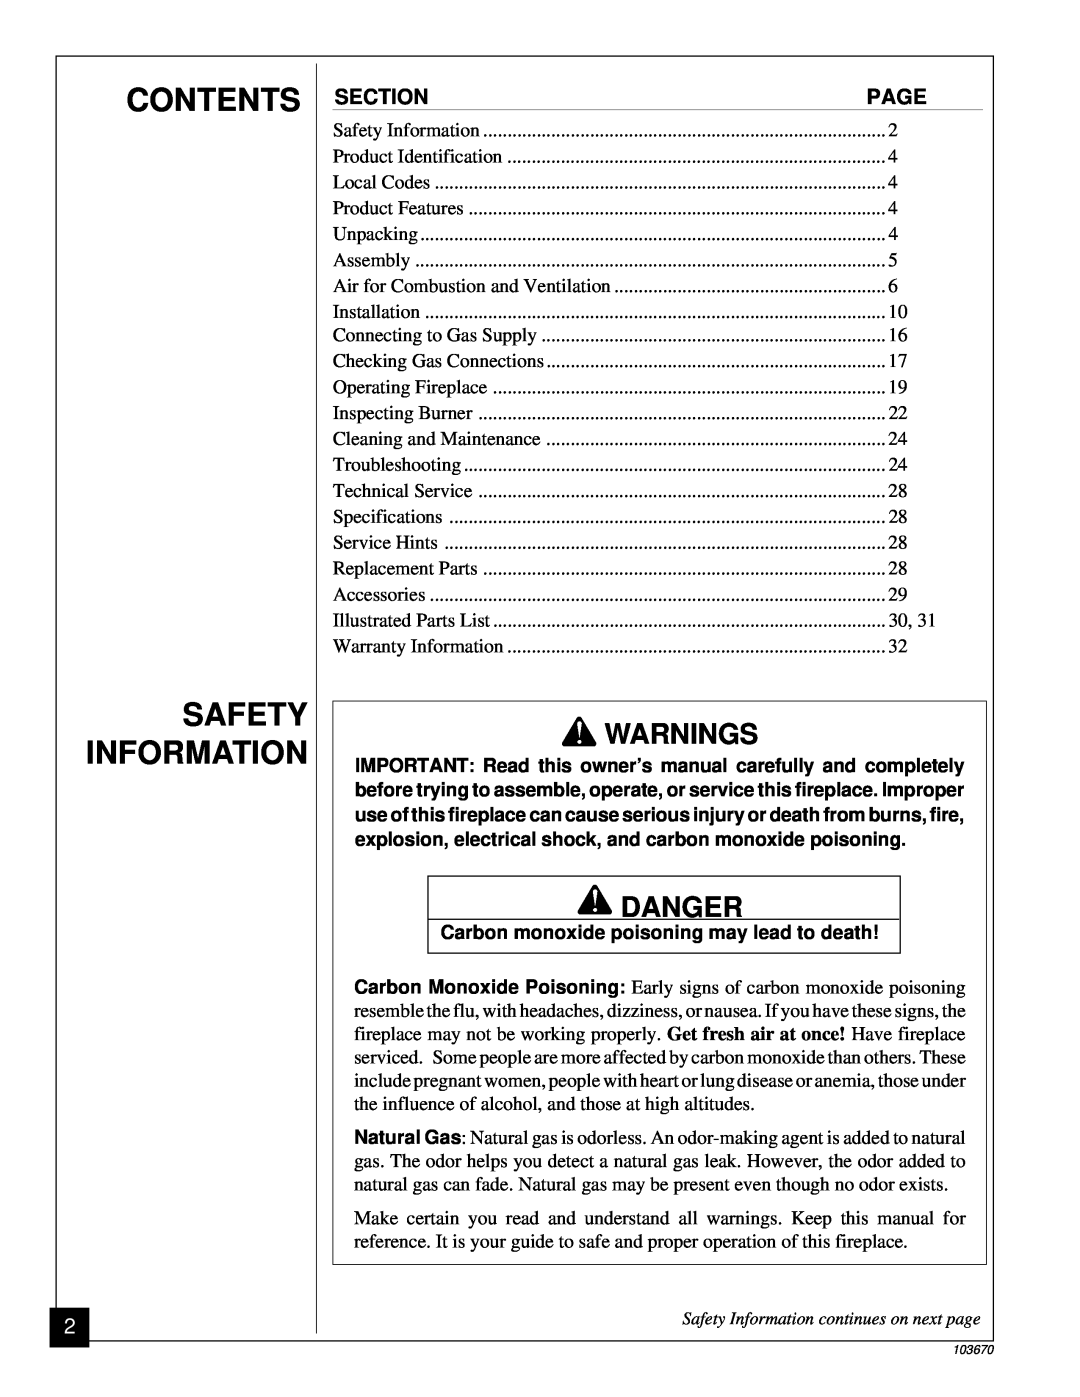 Vanguard Heating VMH10TN installation manual Contents, Safety, Information, Section, Page 